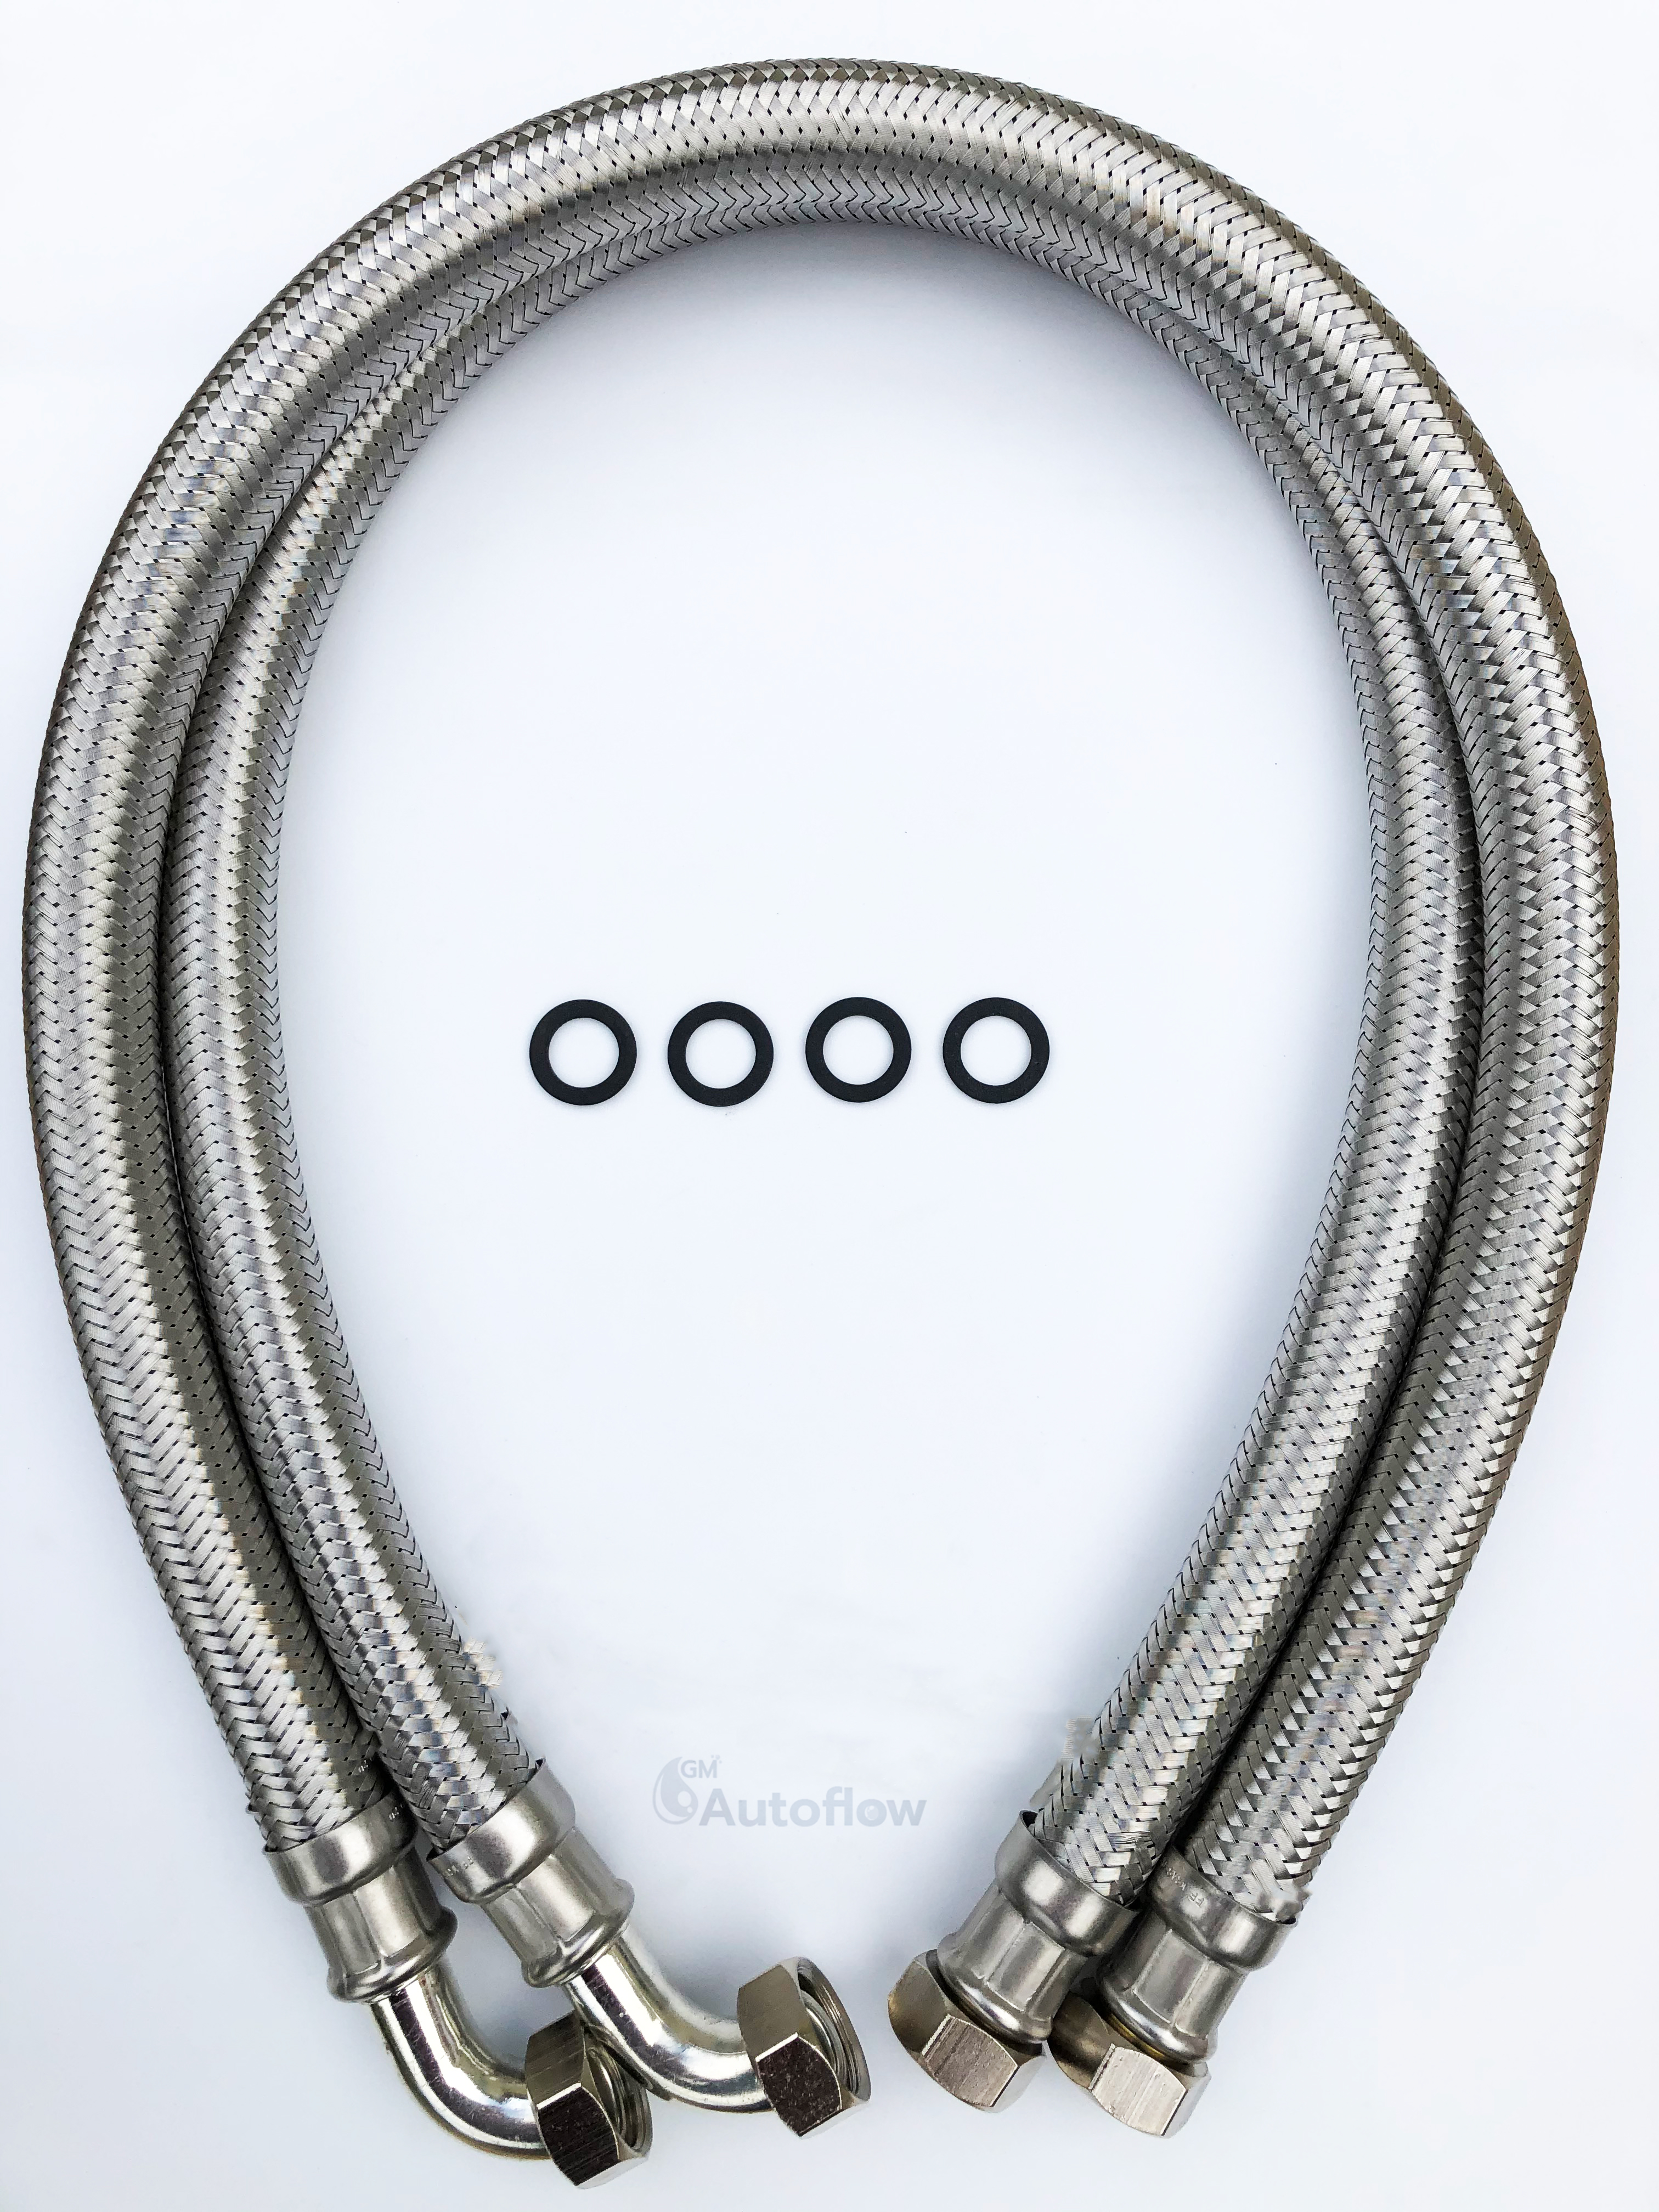 22mm Stainless Steel Hoses, 800mm long Pair AF703